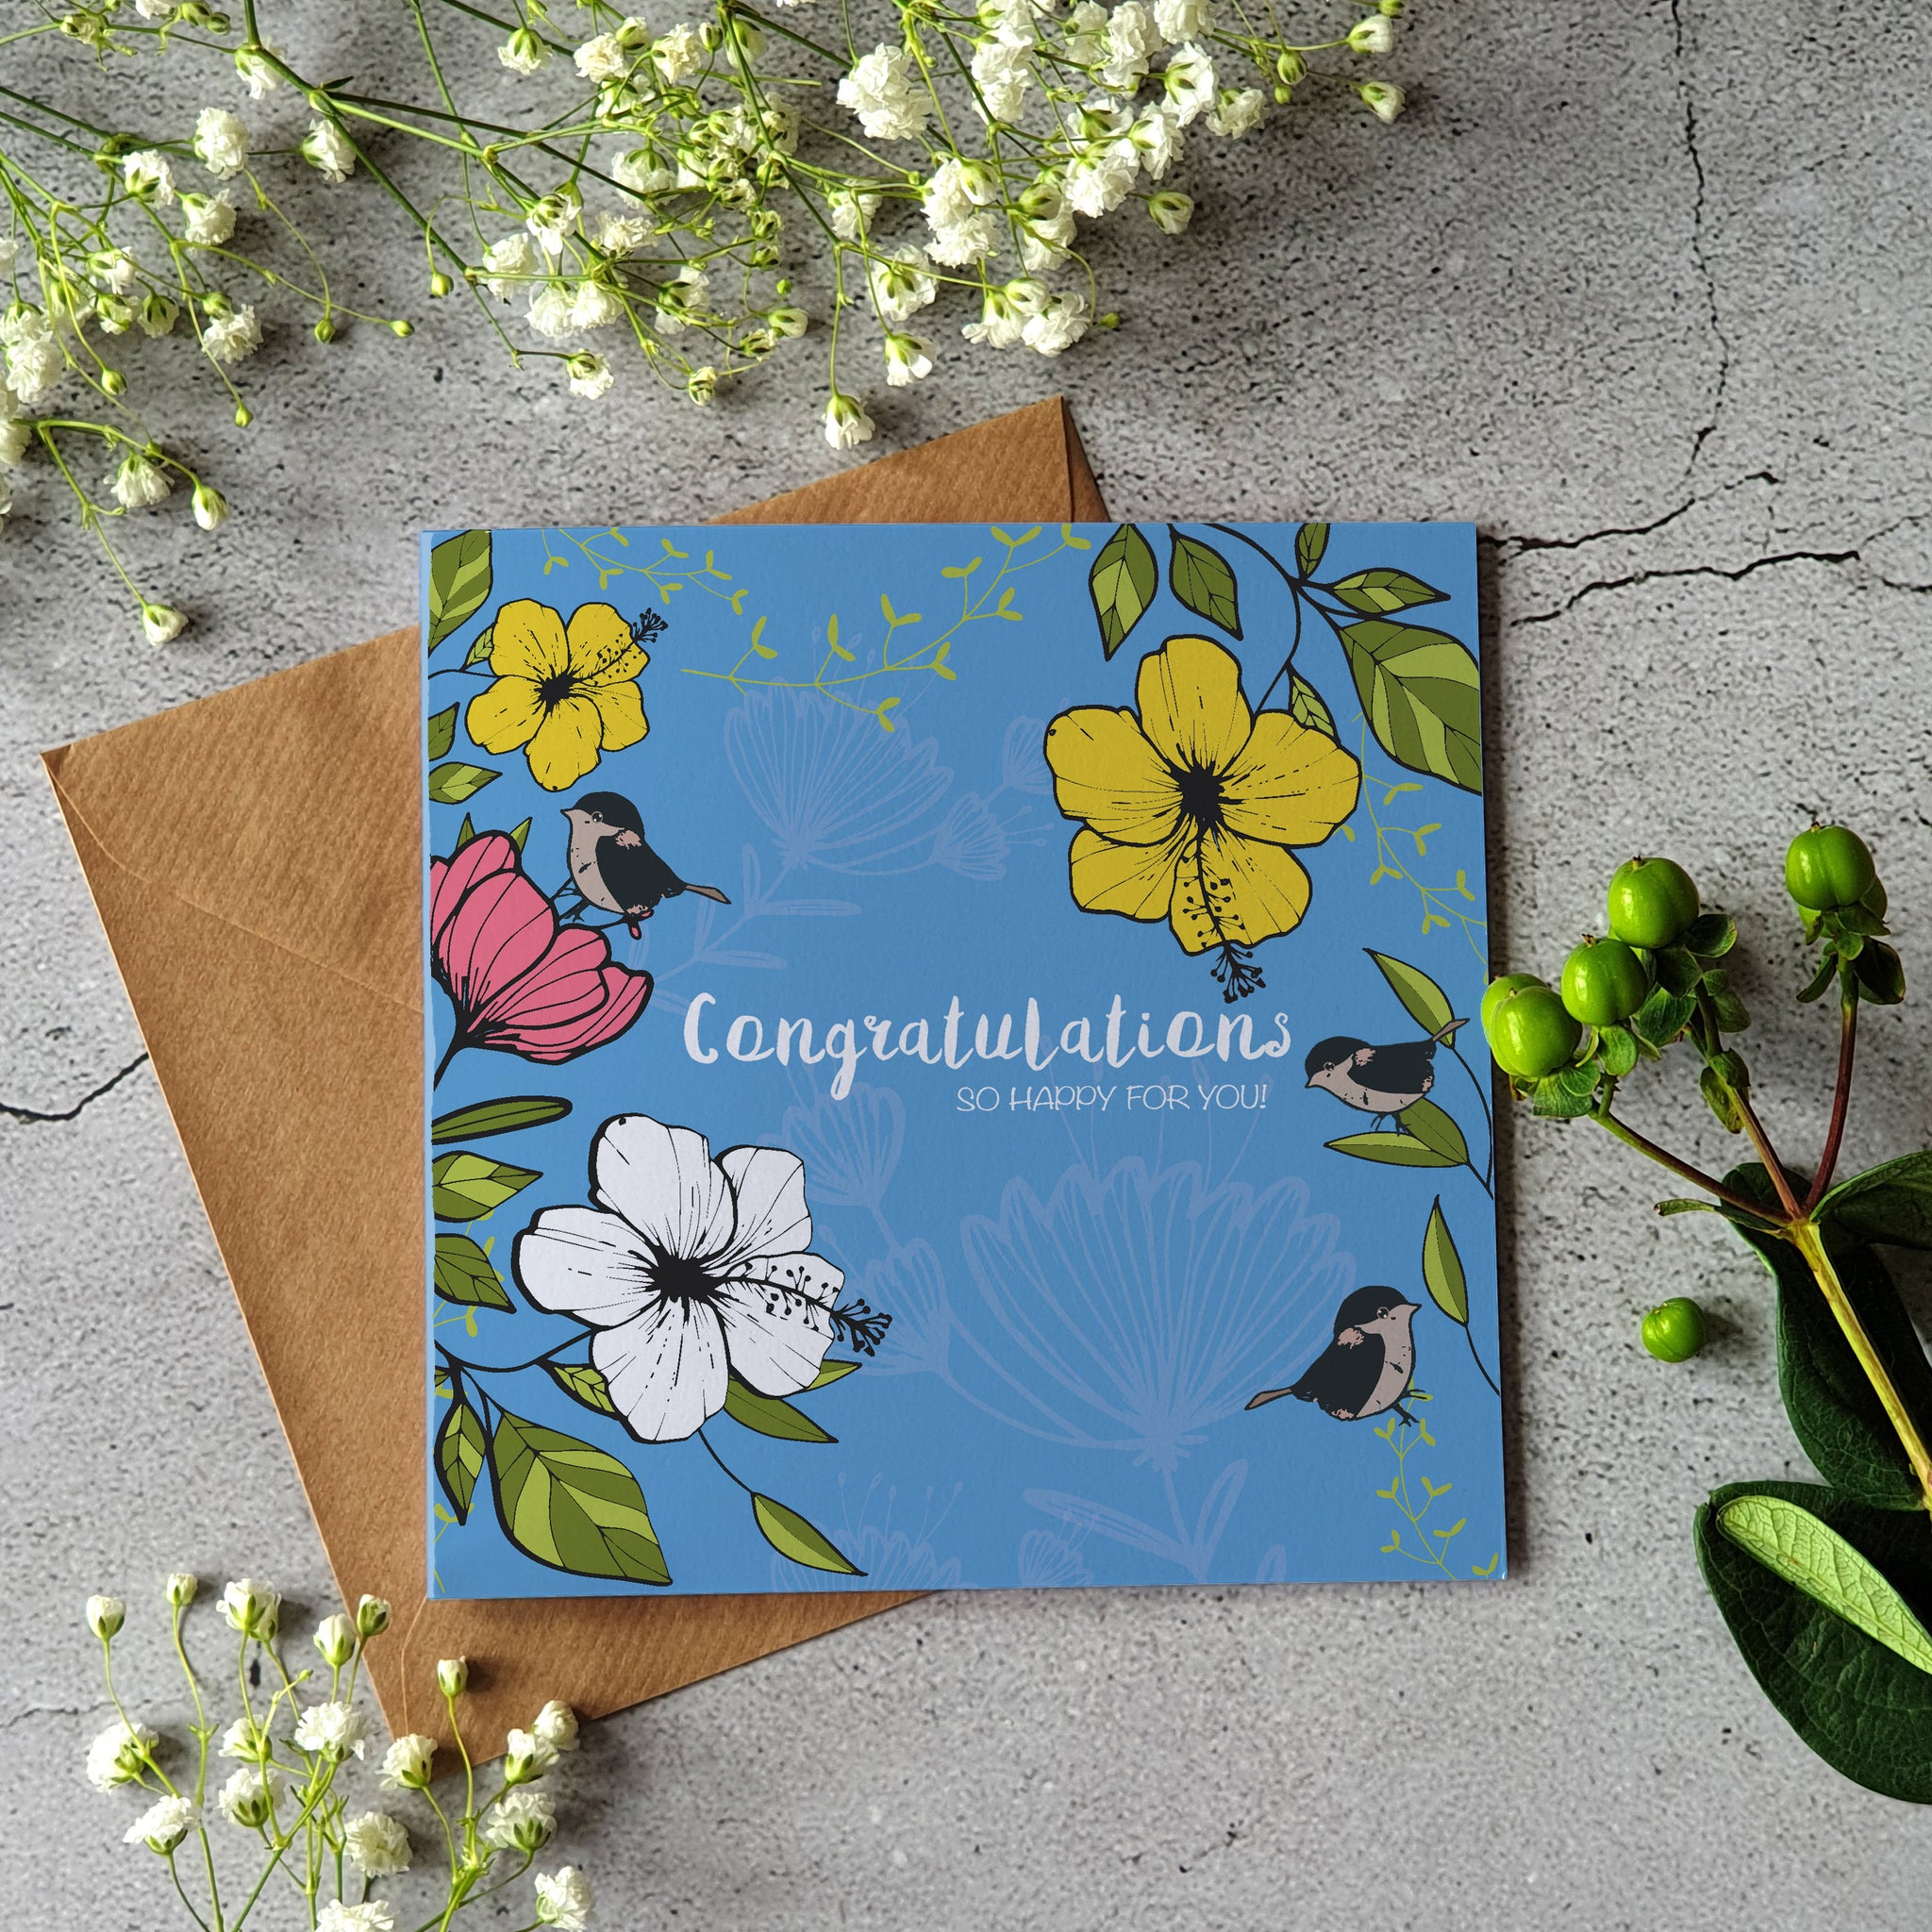 Congratulations, so happy for you greeting card